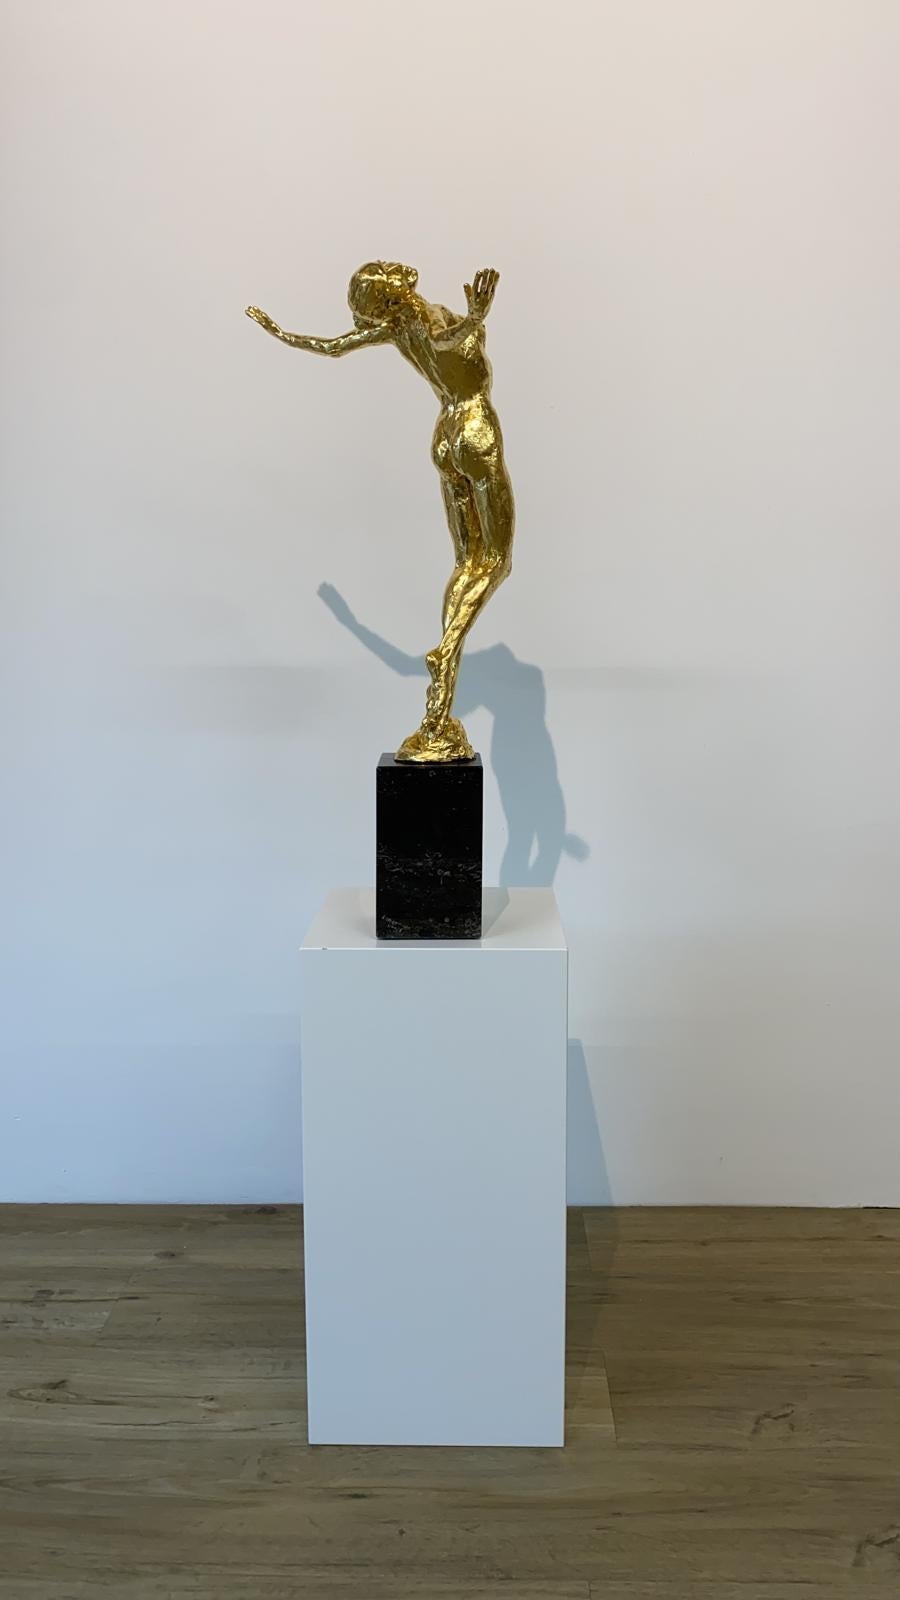 Living Daylight Gold- 21st Century Sculpture of a nude woman  5